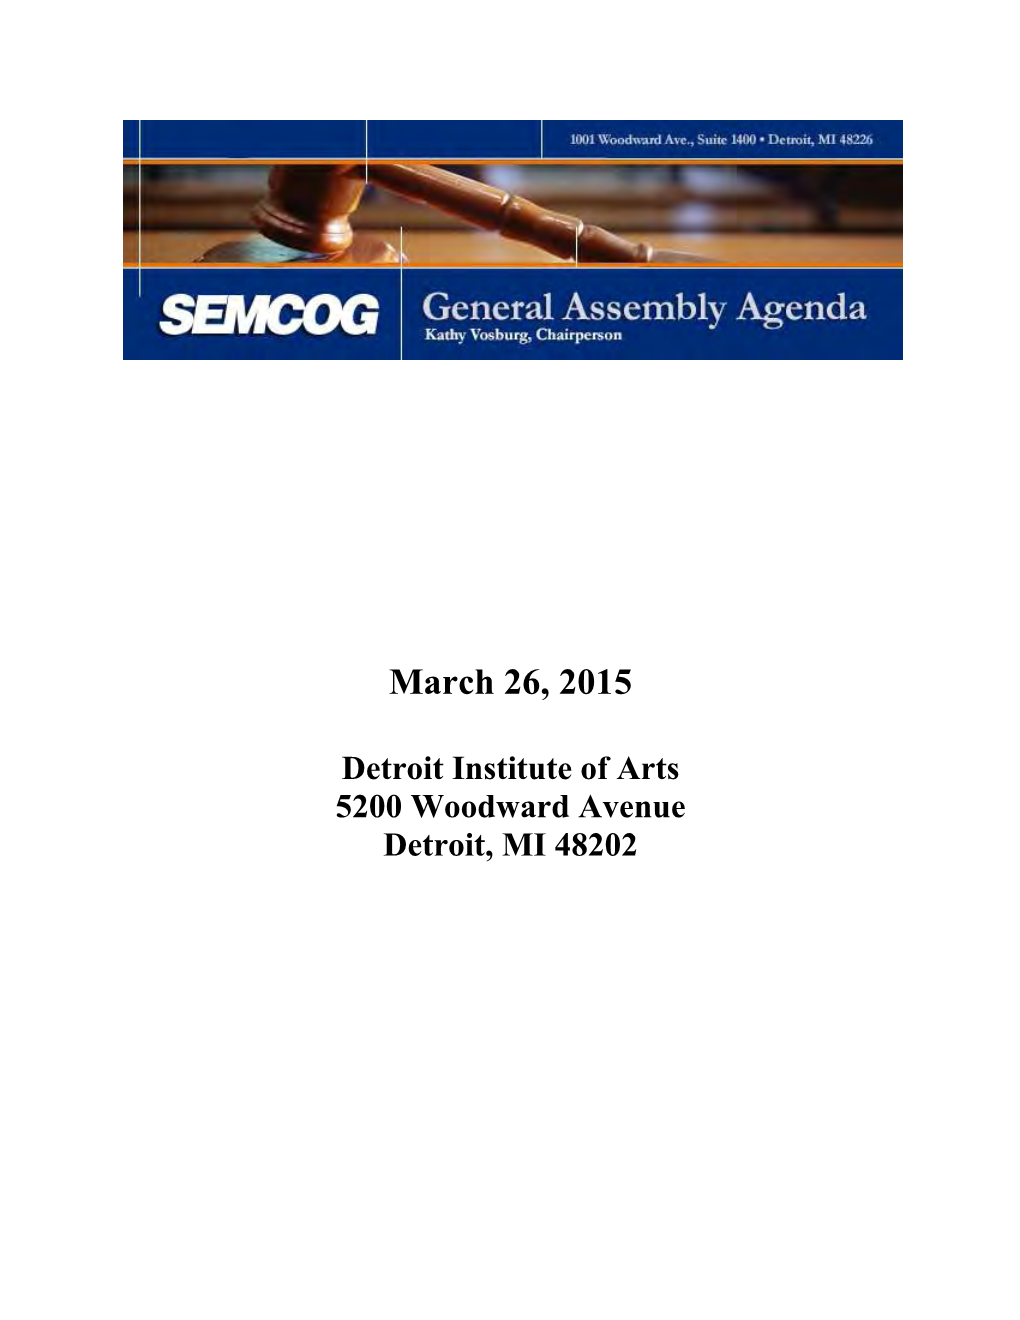 General Assembly Agenda March 2015